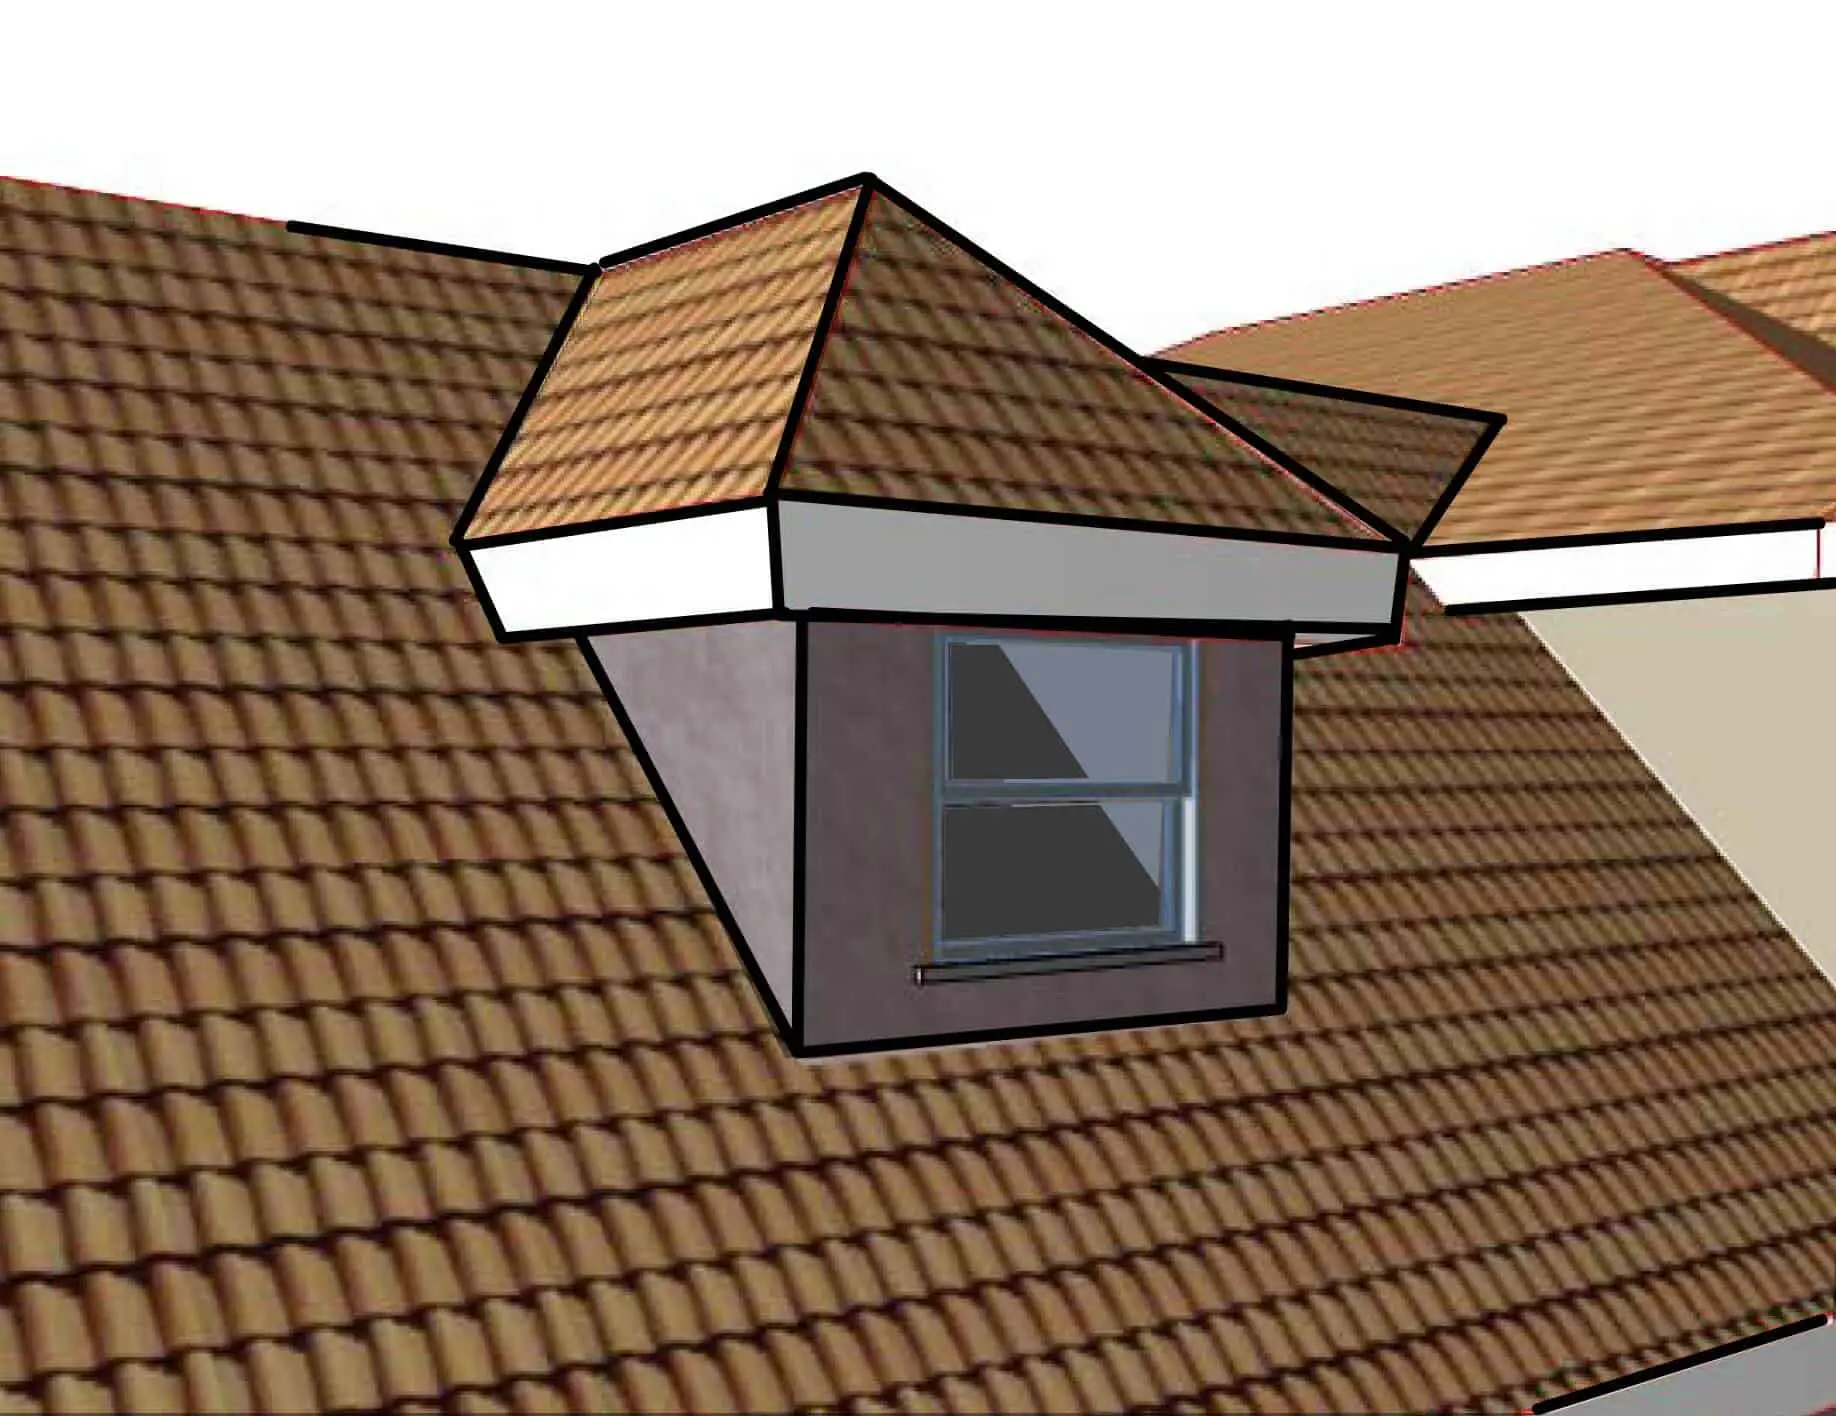 How Much Does Dormer Cost In 2020?